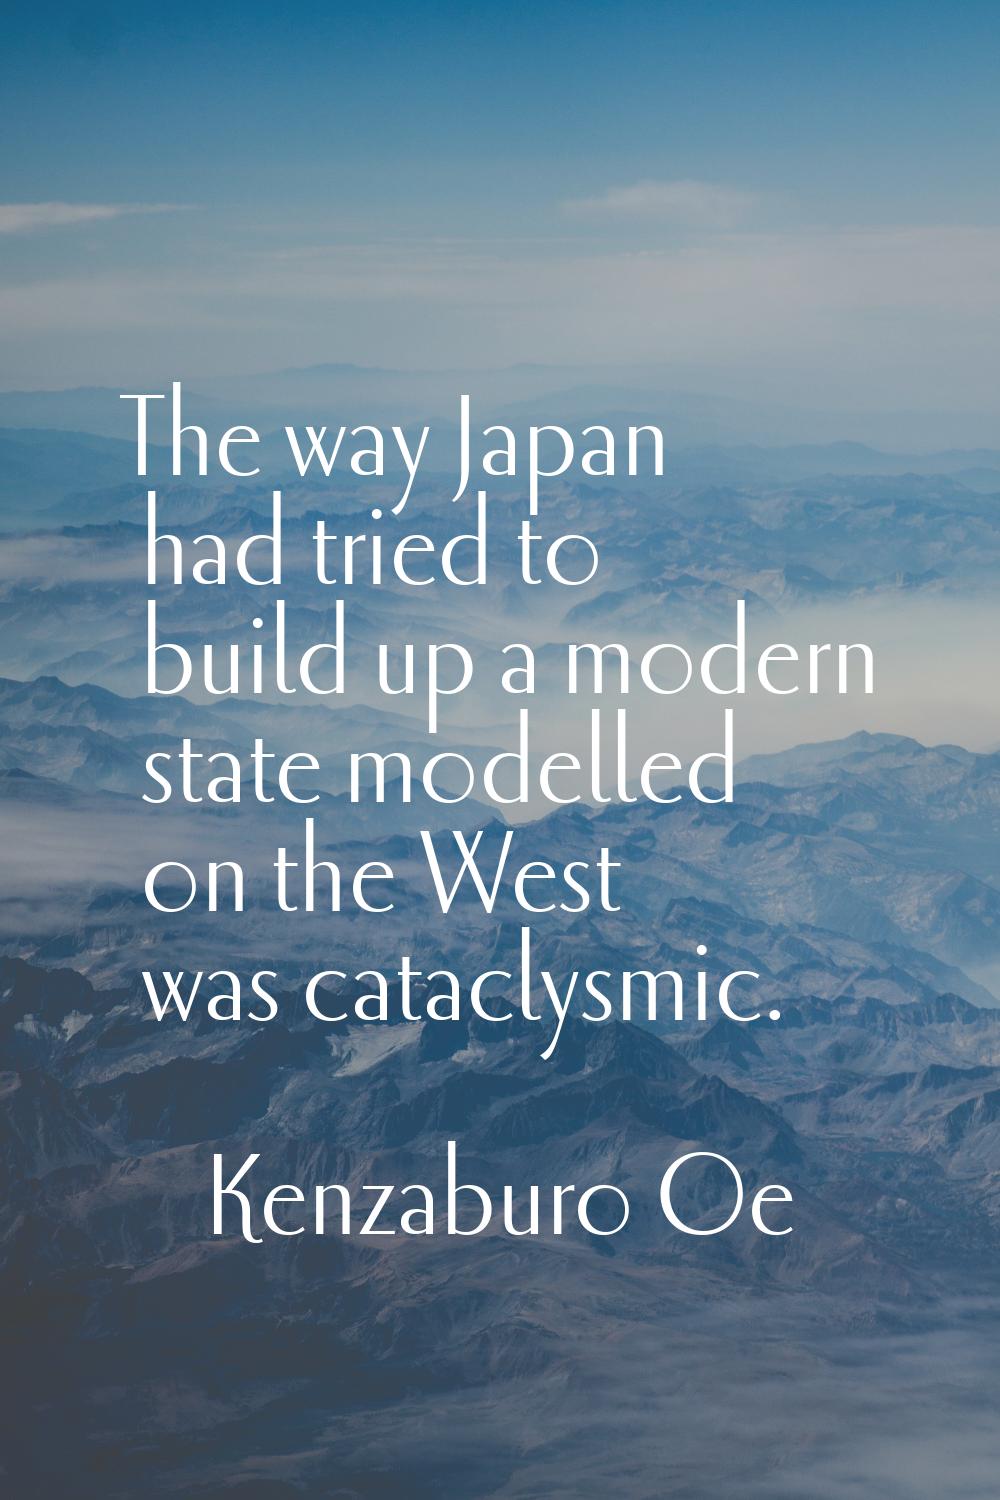 The way Japan had tried to build up a modern state modelled on the West was cataclysmic.